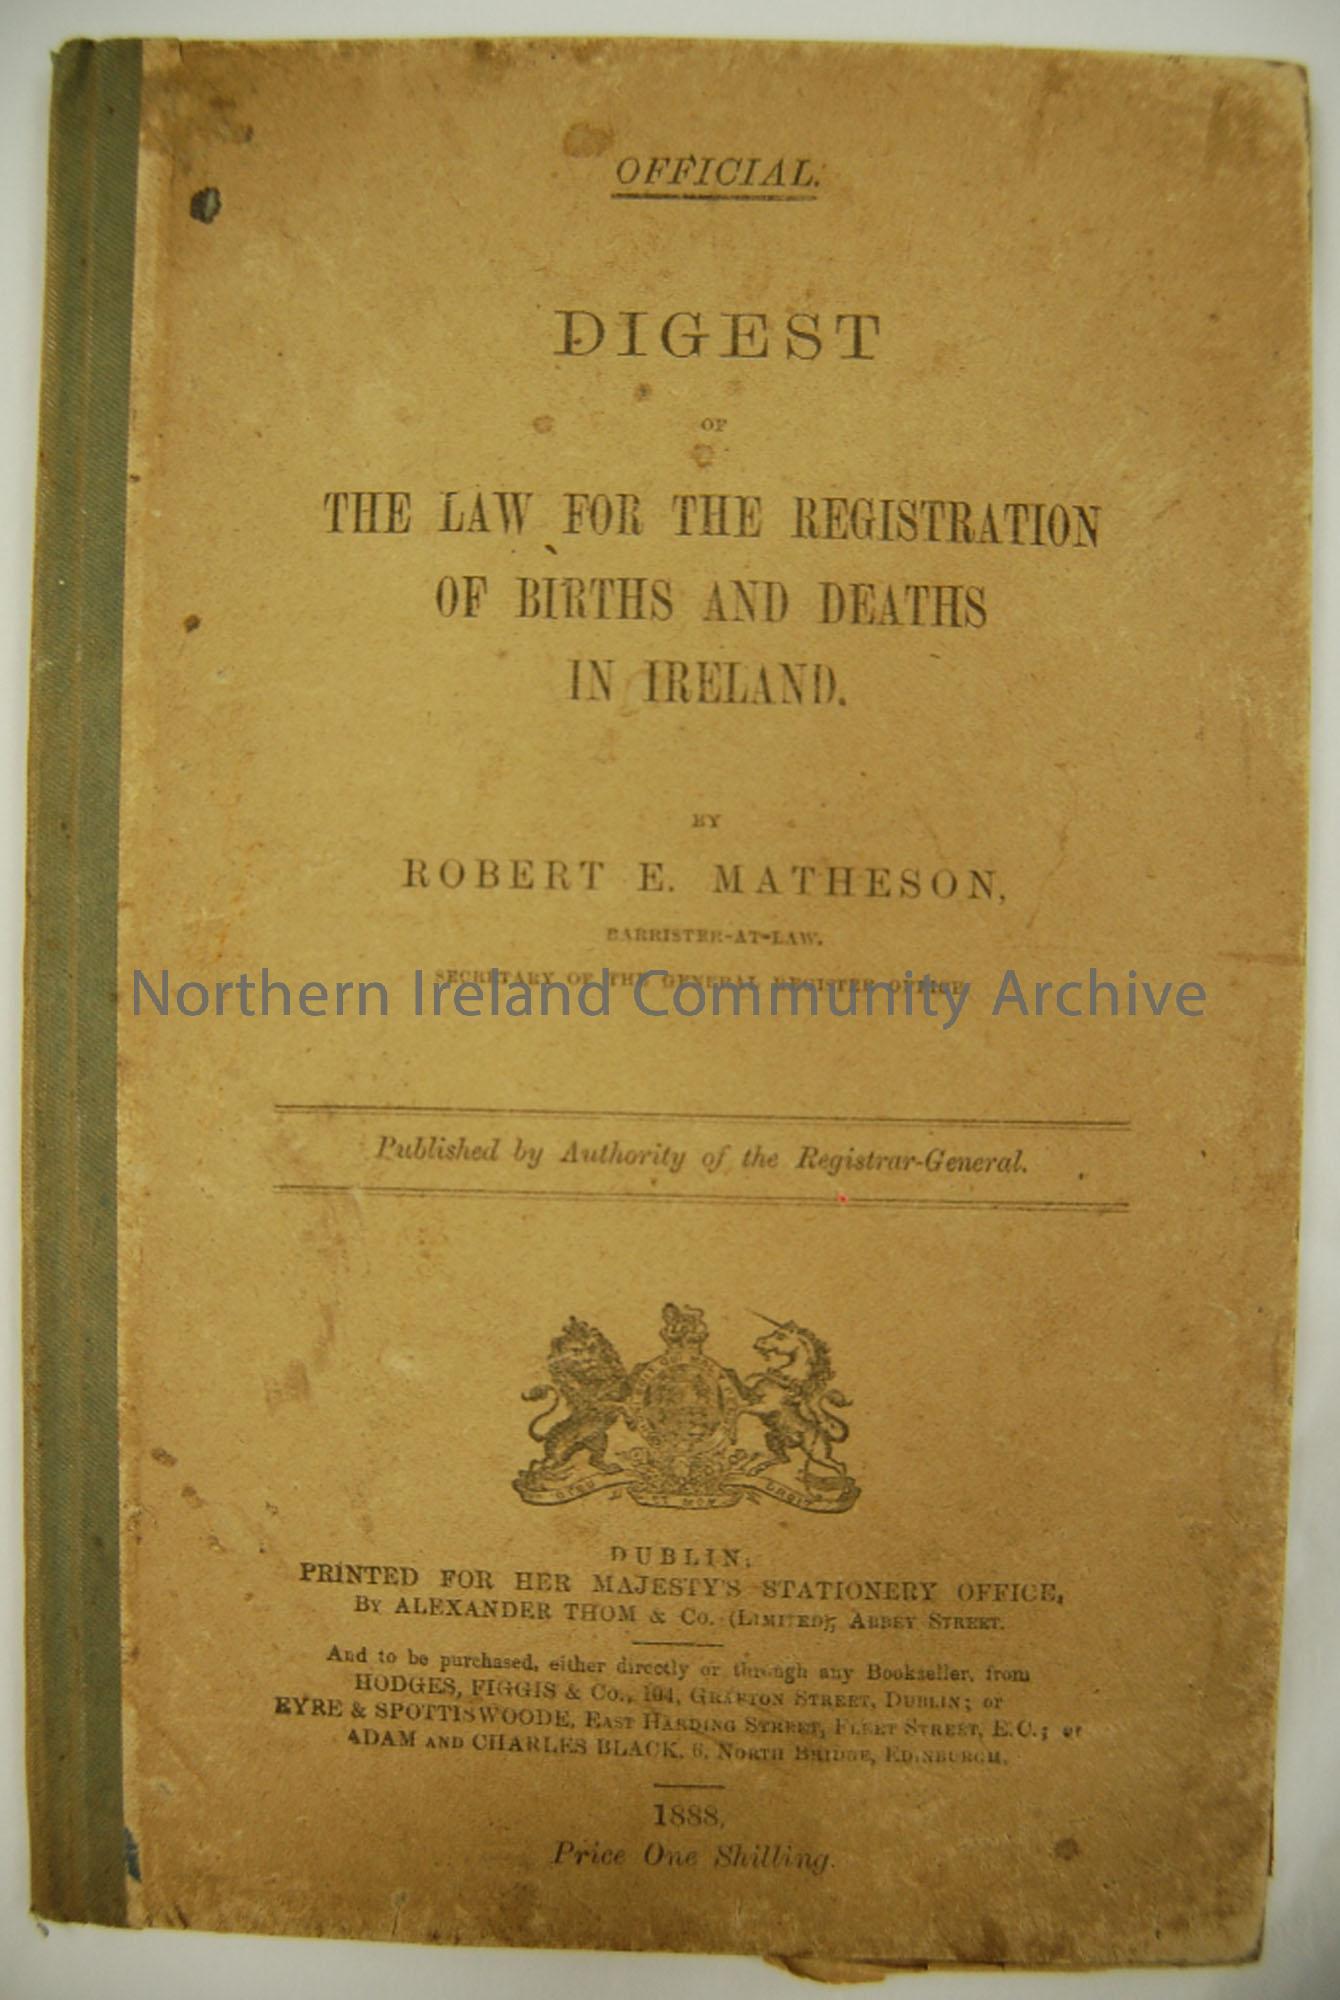 Official Digest of The law for the registration of births and deaths in Ireland. 1888.